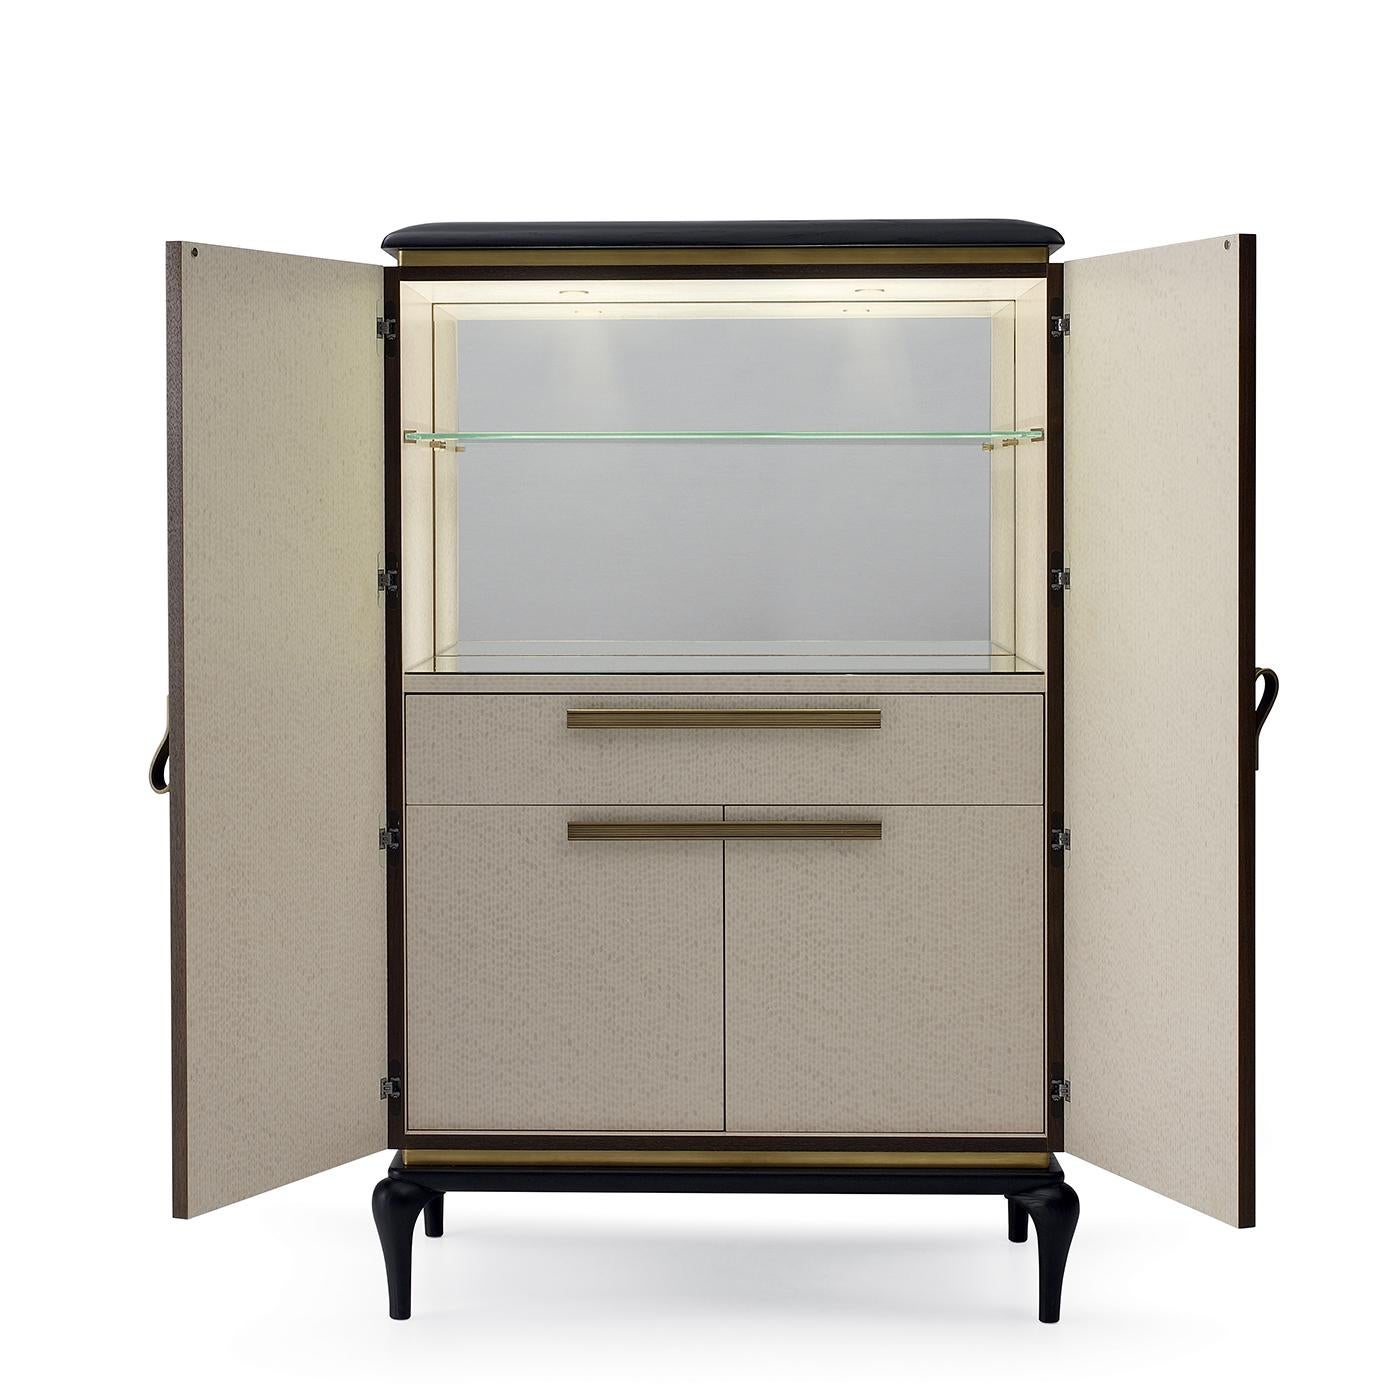 An elegant cabinet by Piero Lissoni will be a stylish addition to both a modern or Classic decor. Crafted with a solid frame of plywood and ashwood and Canaletto walnut-veneered MDF, this piece is enriched with burnished brass handles and solid ash